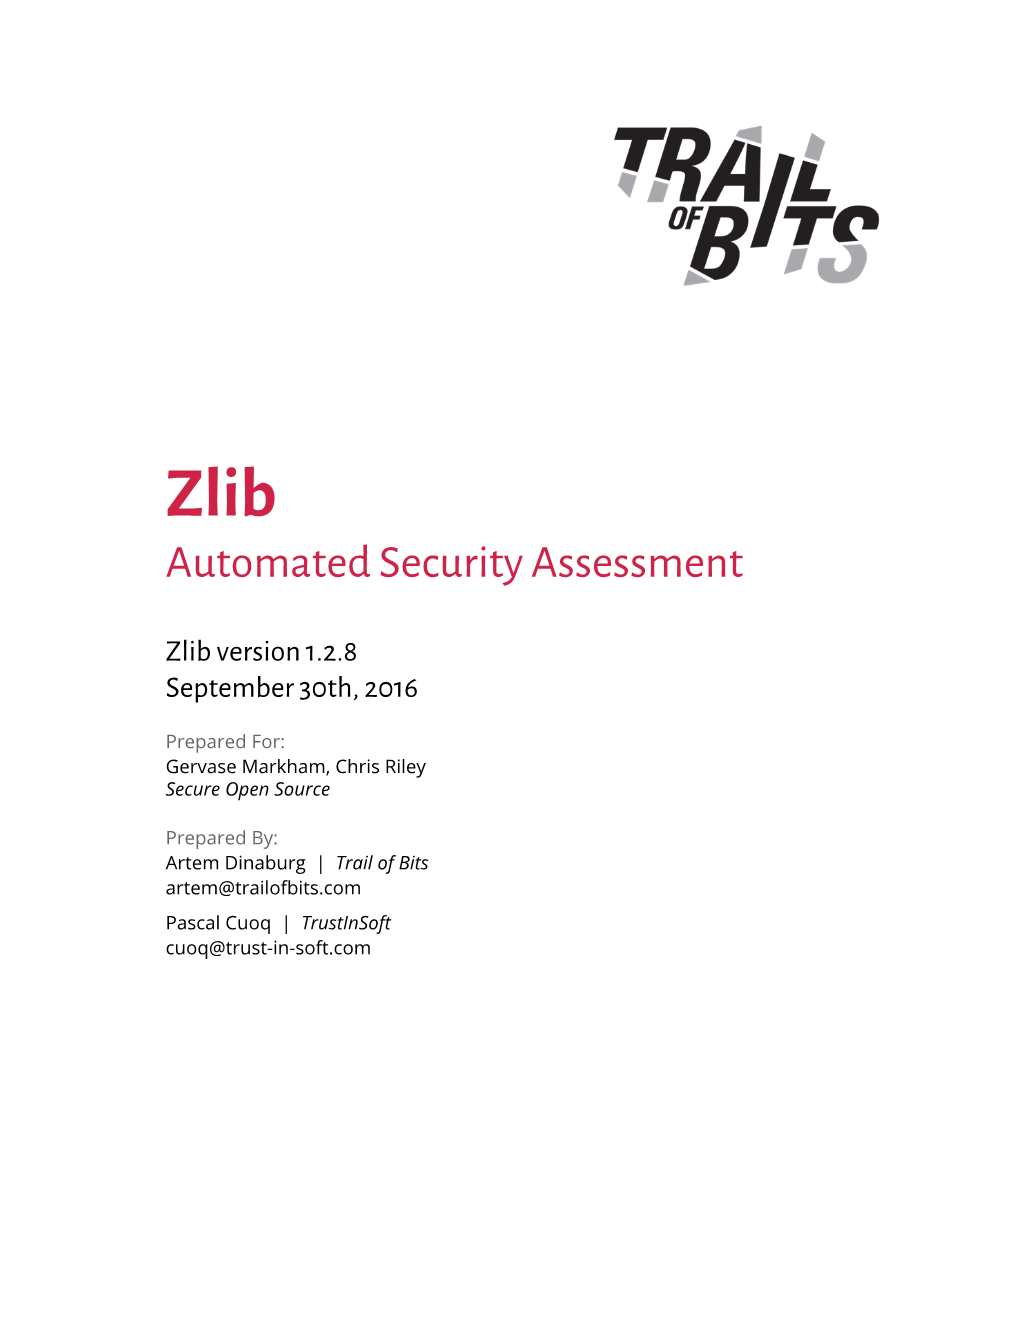 Zlib: Automated Security Assessment